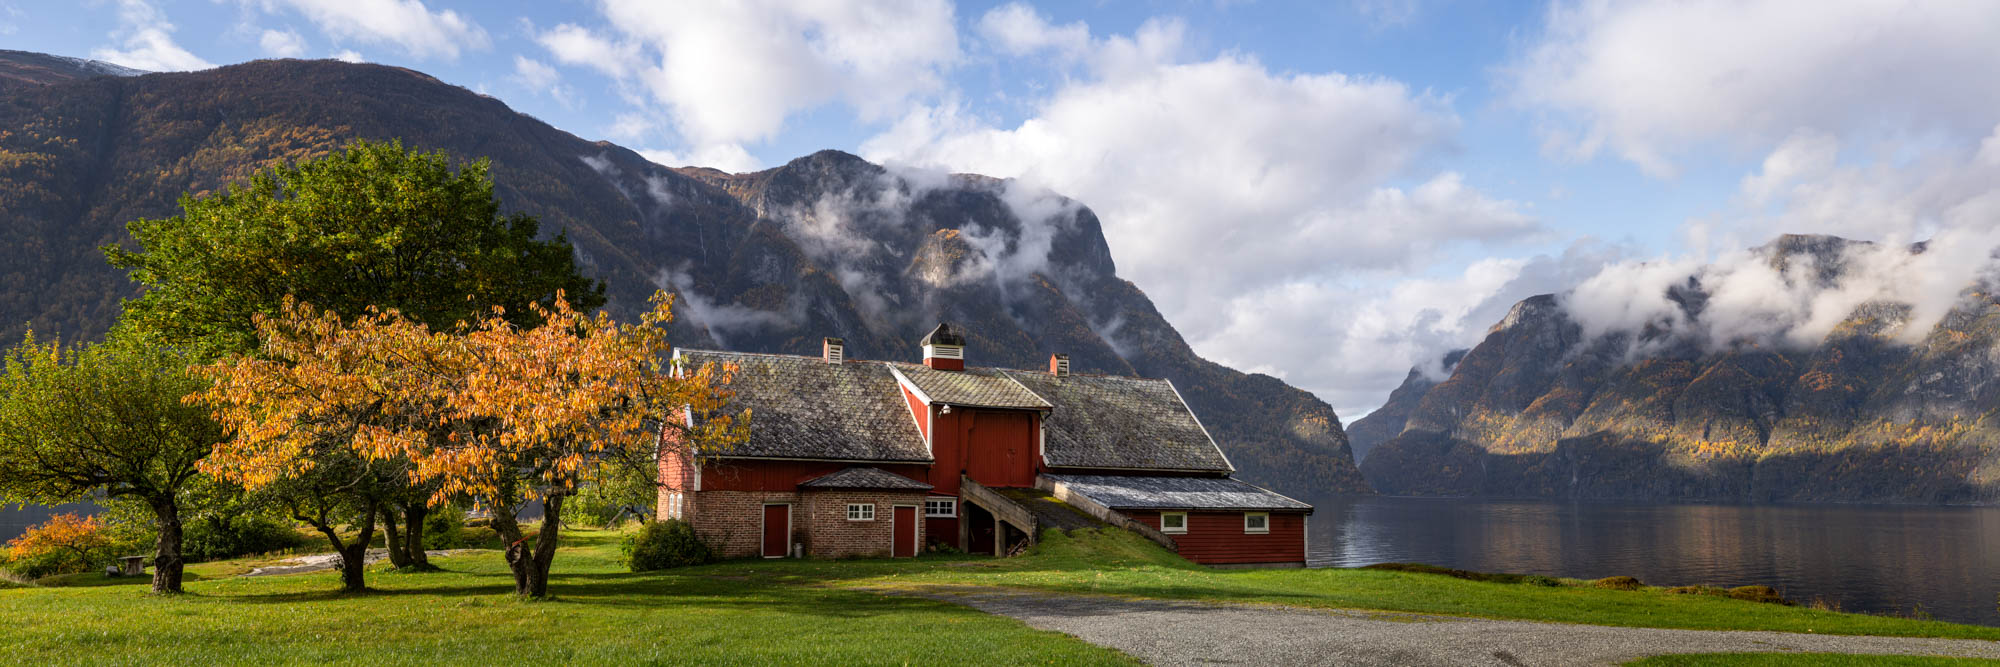 Panorama of a red barn on Aurlandsfjord in Norway